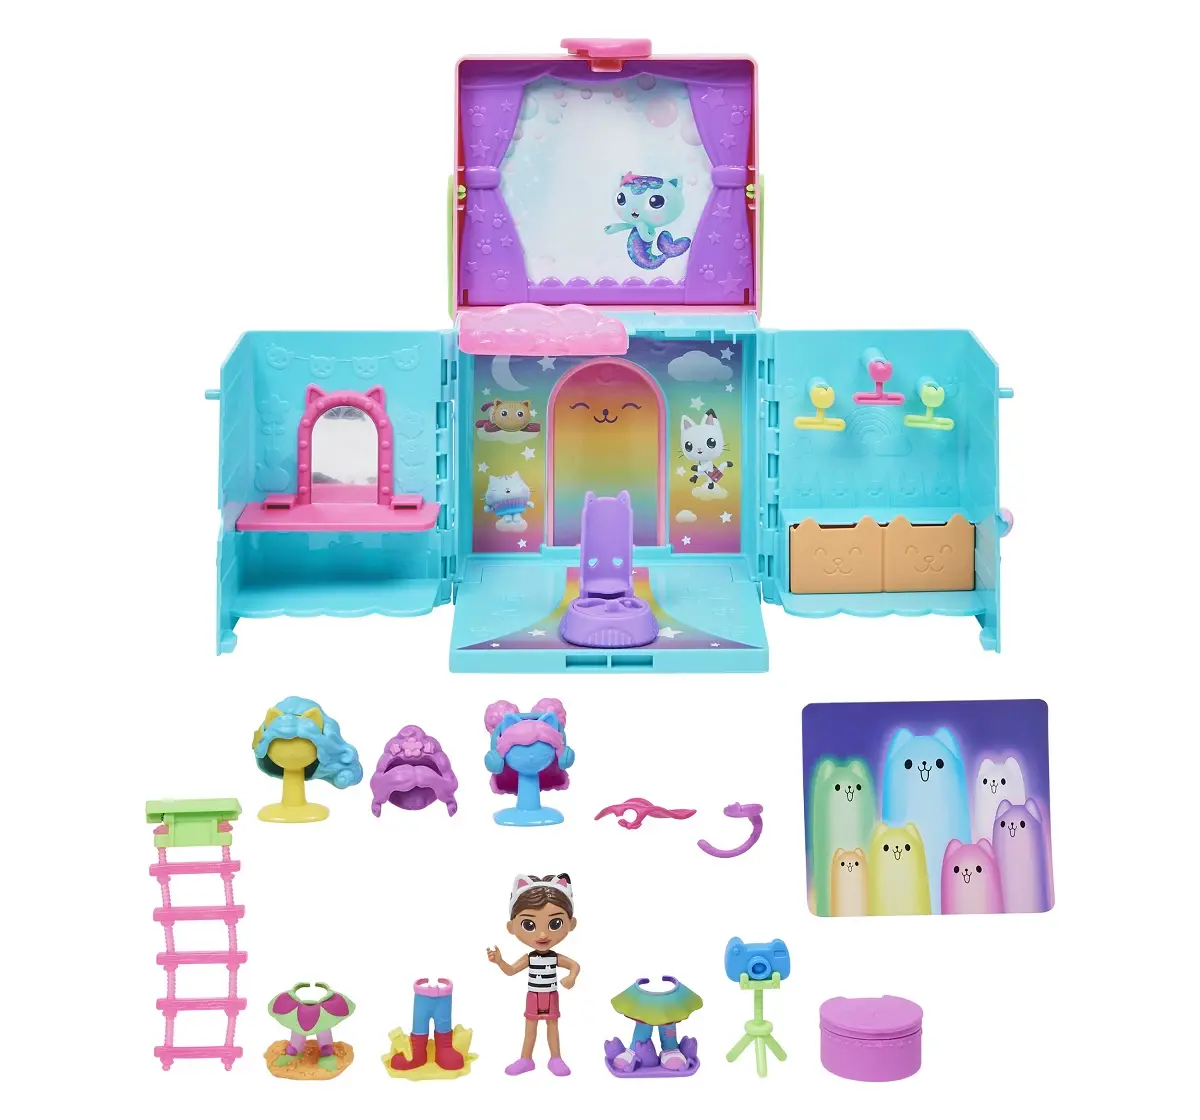 Gabbys Dollhouse, Dress-Up Closet Portable Playset with a Gabby Doll, Surprise Toys and Photo Shoot Accessories, Kids Toys for Ages 3 and up